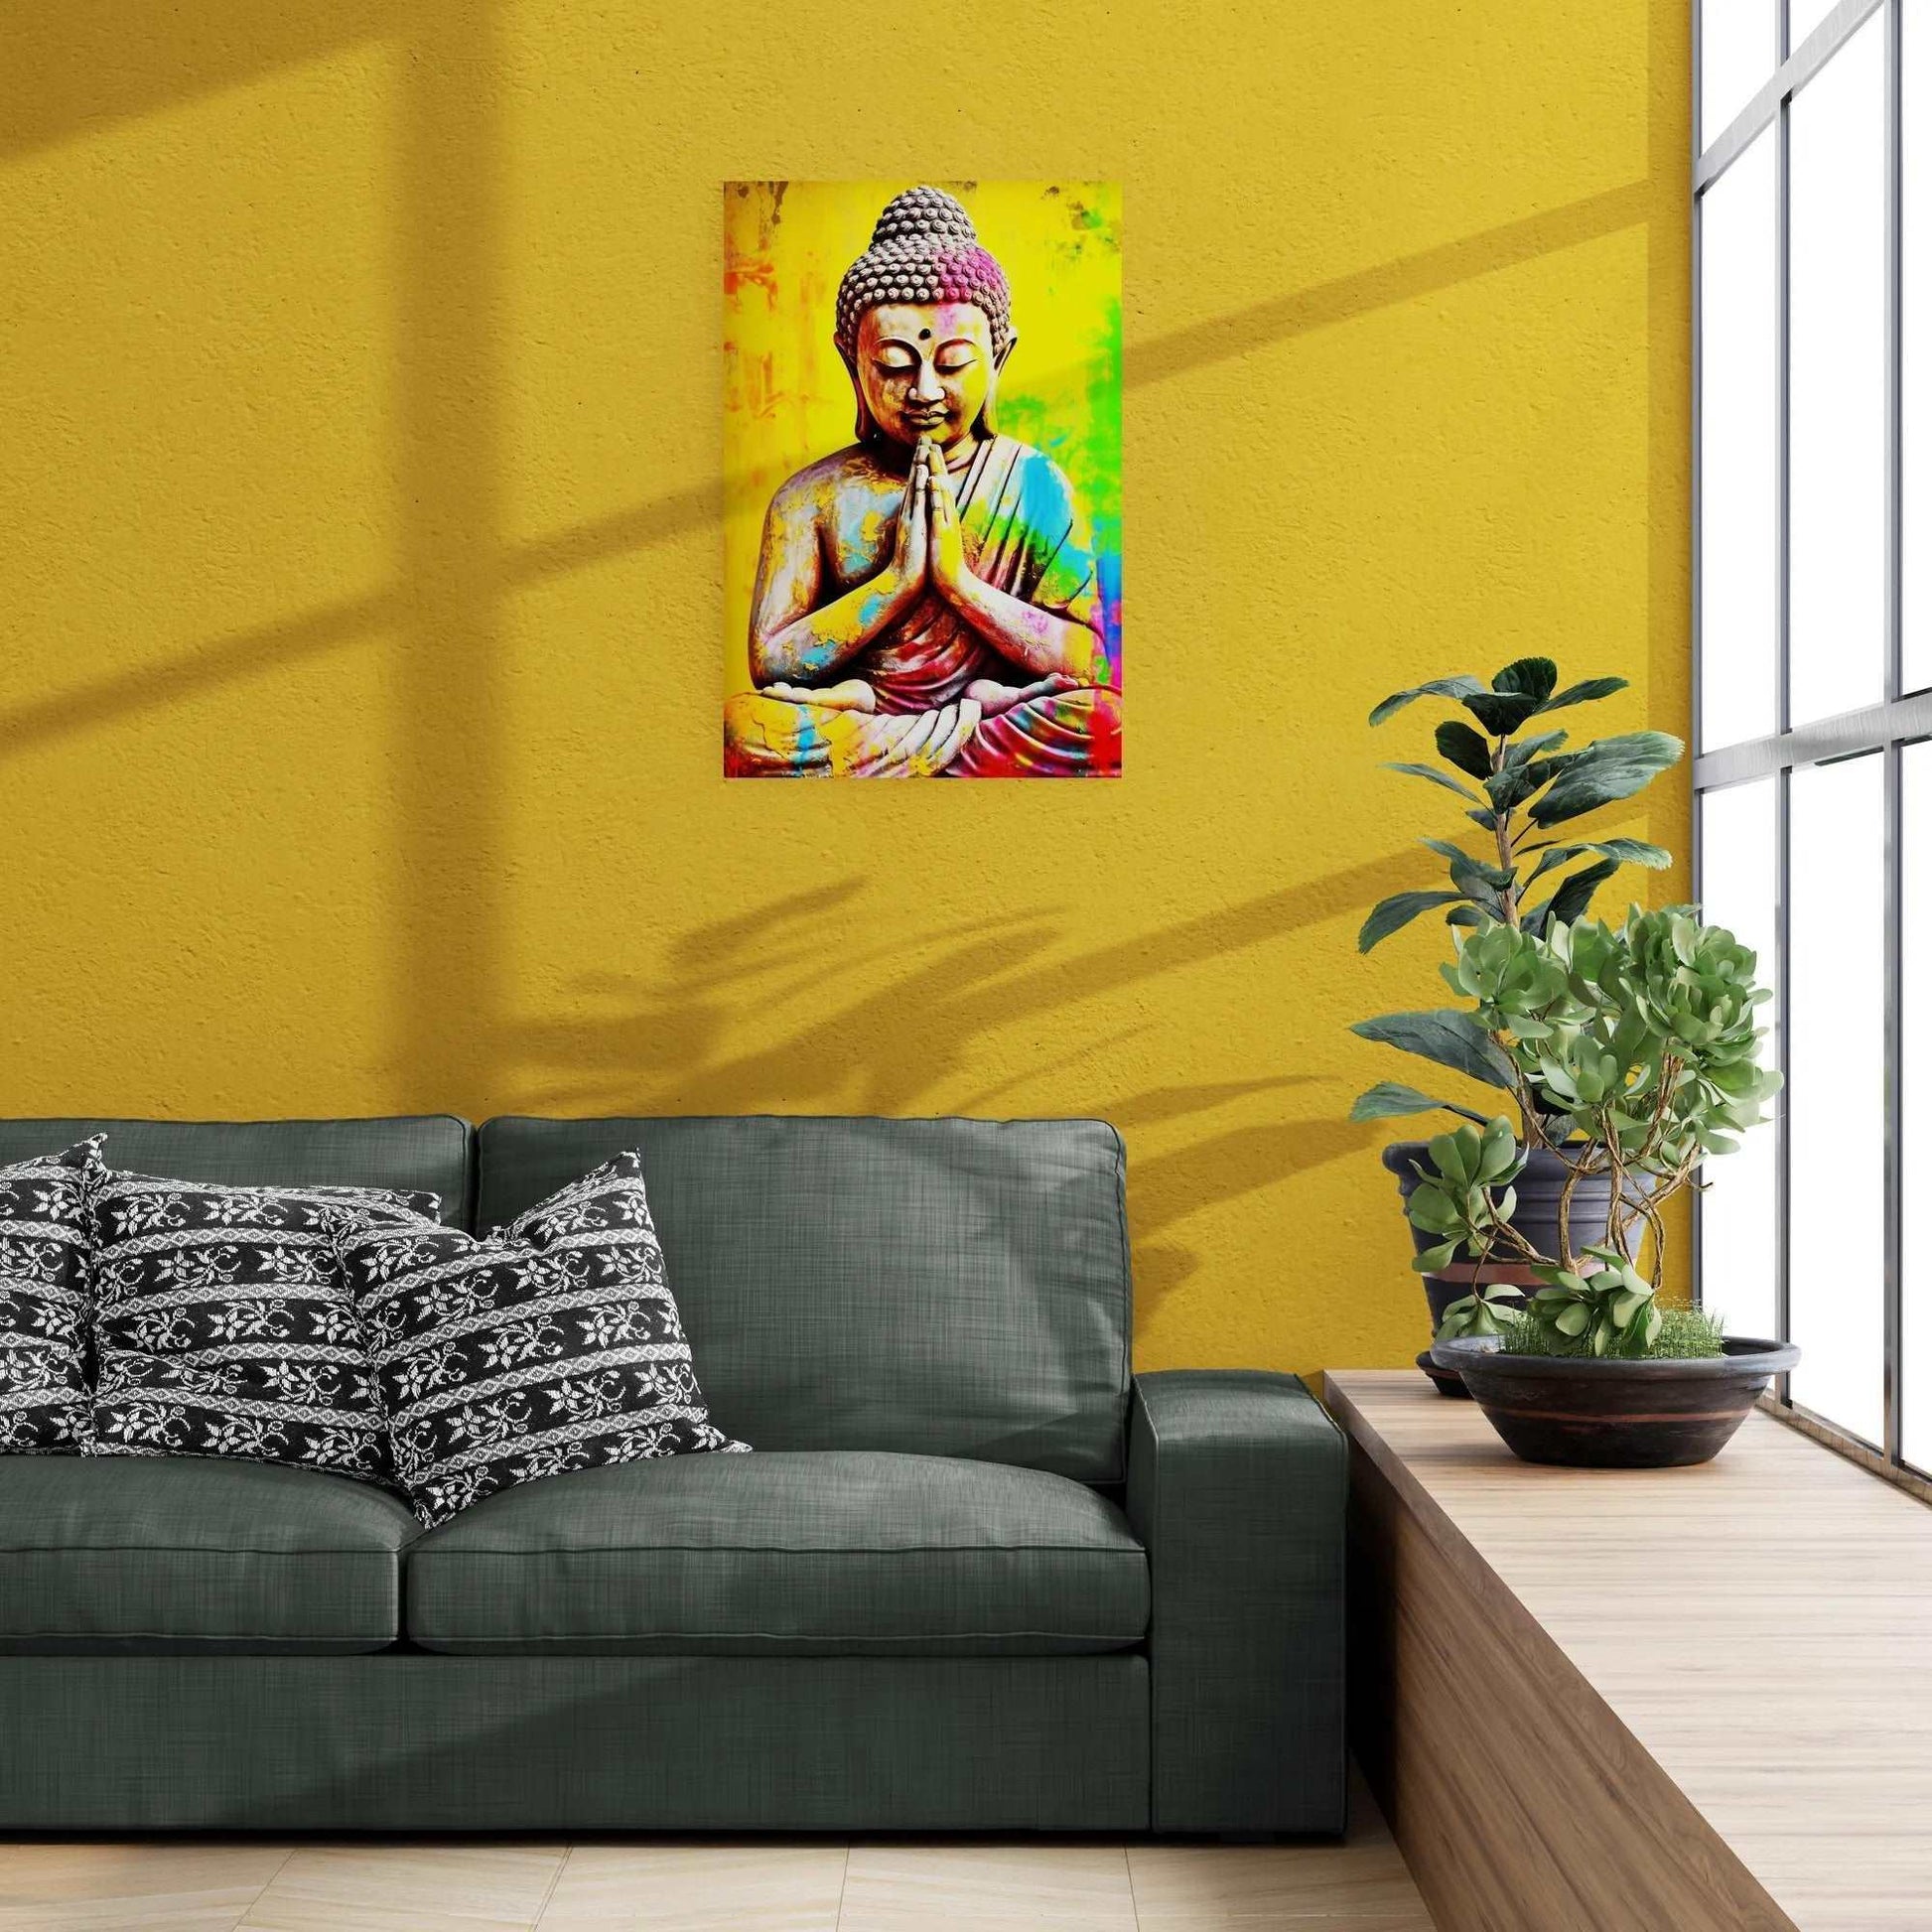 Buddha painting with a dynamic splash of colors set against a bold yellow wall in a living room, near a dark green couch with patterned cushions and a potted plant on a wooden floor.